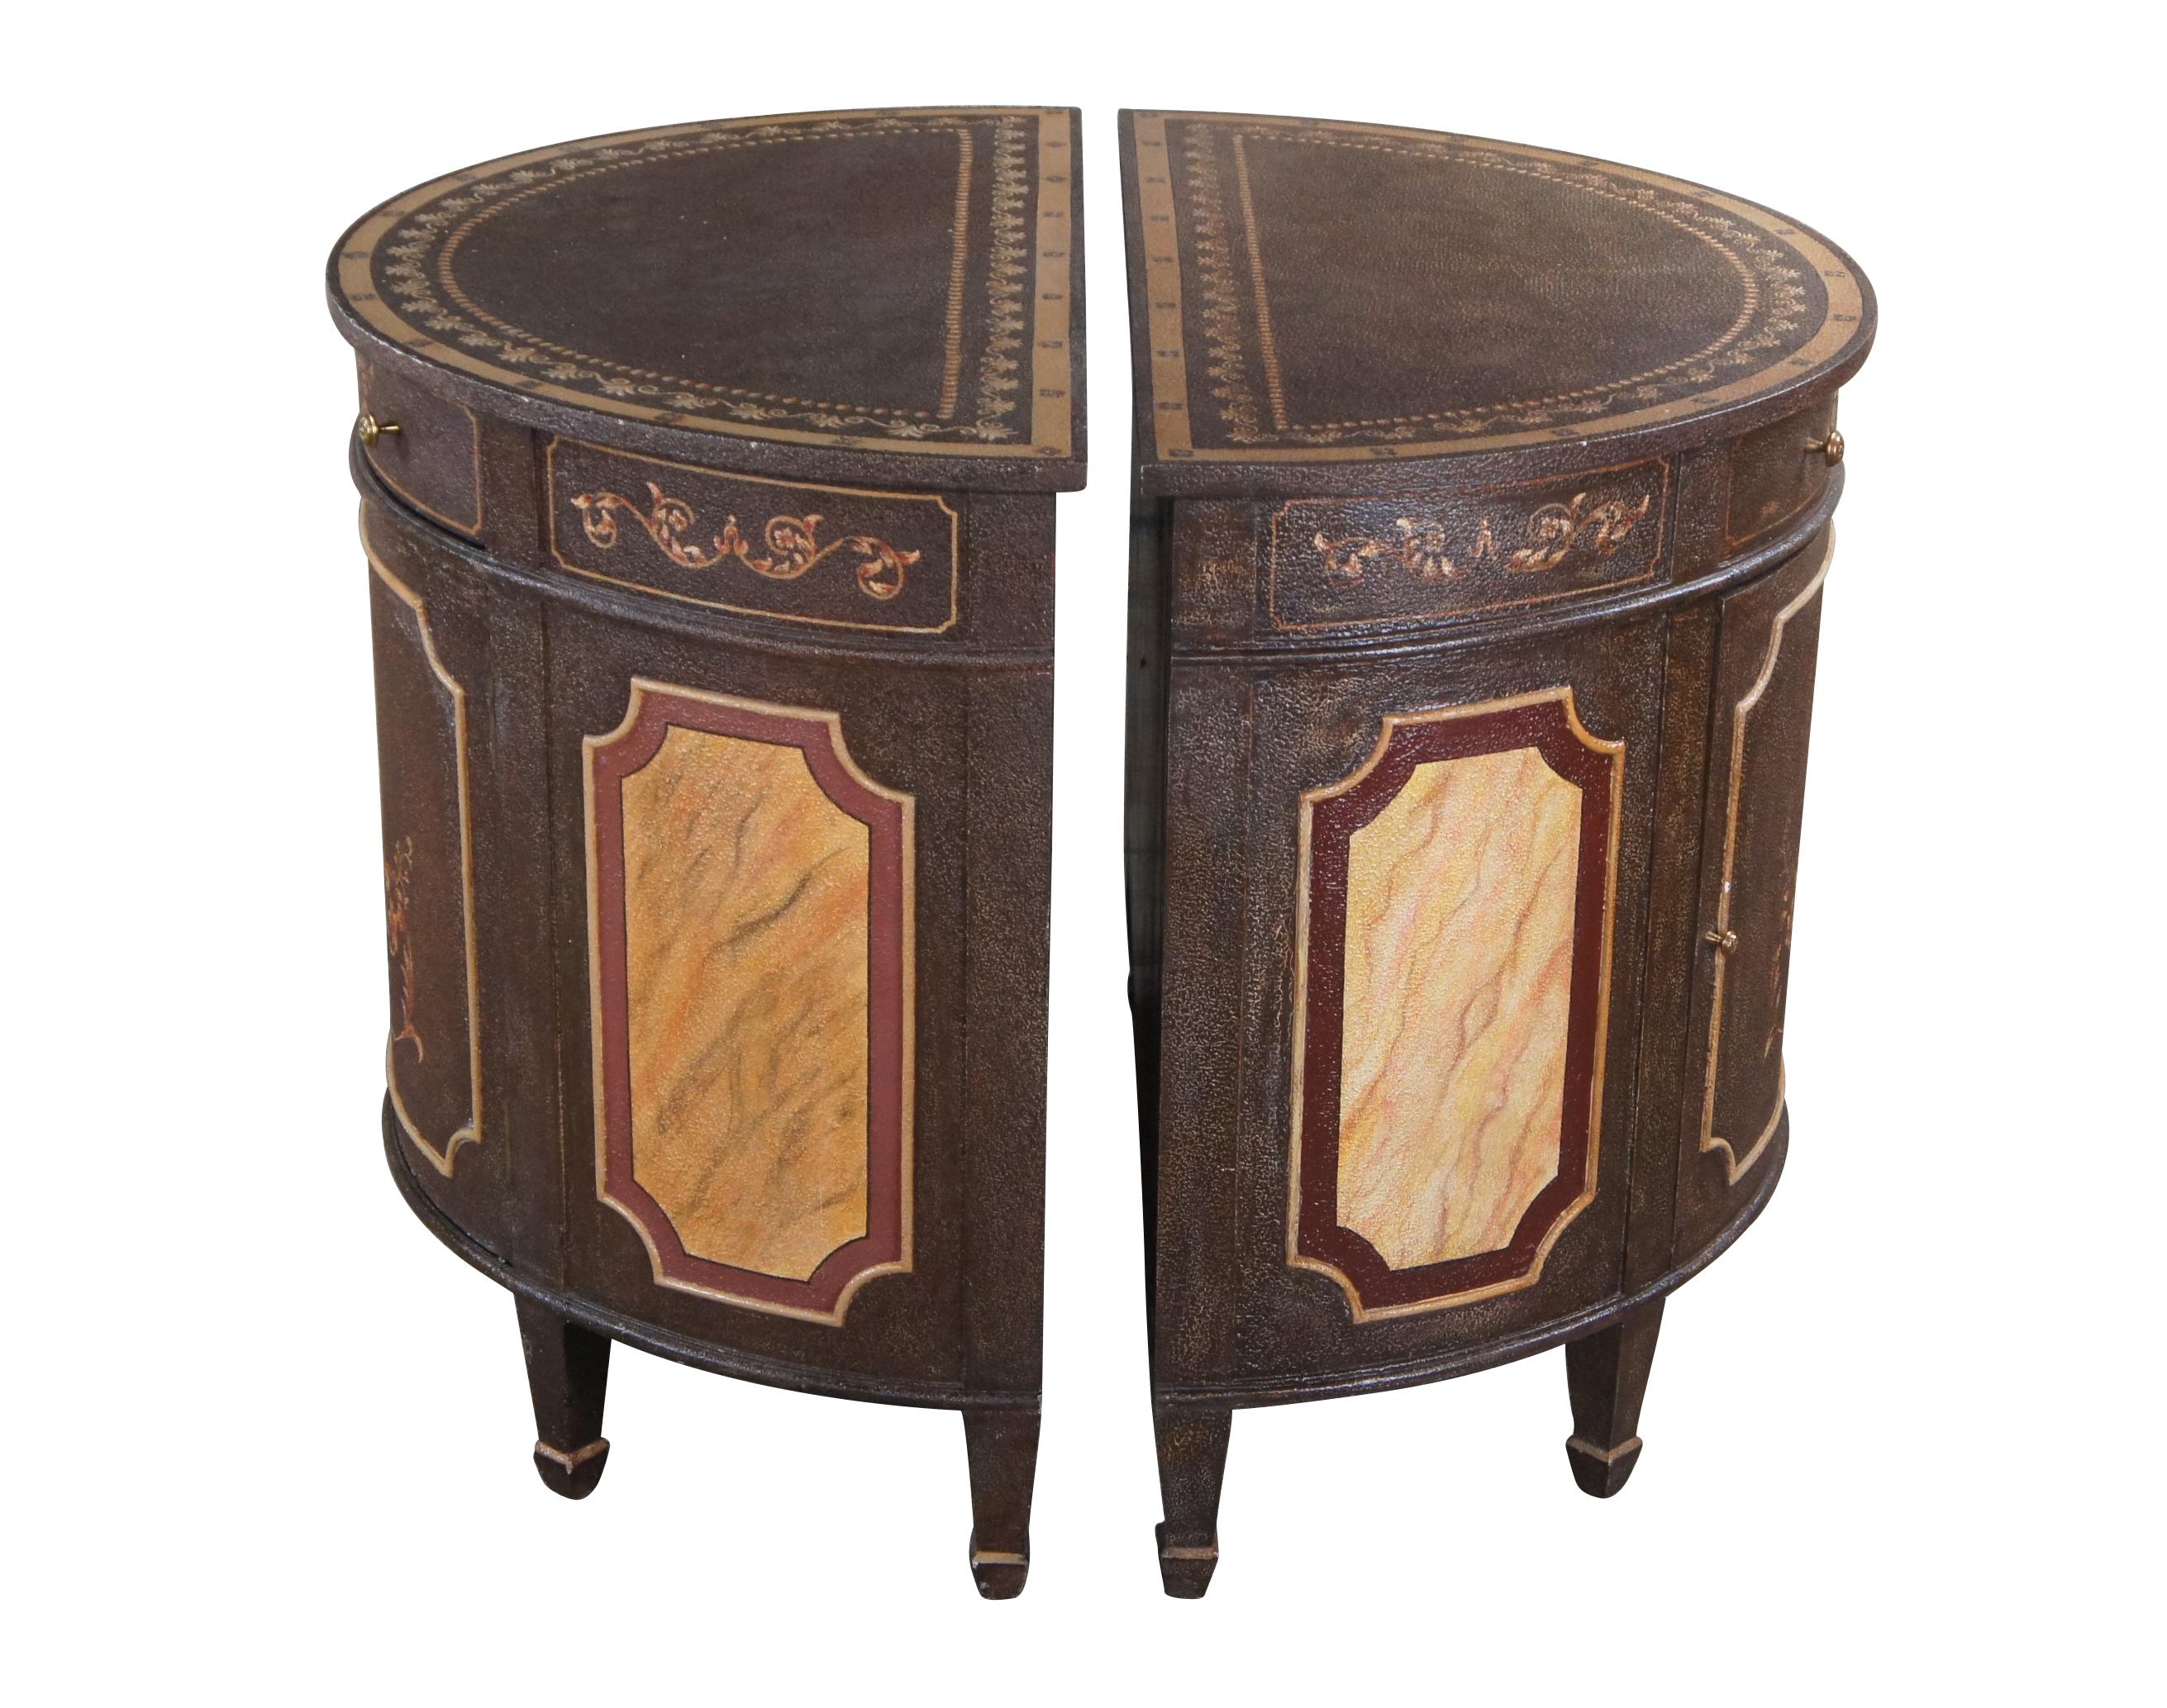 Pair of two Maitland Smith Poise Chiffonier sideboard cabinets, console tables or commodes featuring demilune / half round form with upper drawer, lower cabinet and textured hand painted finish of a Neoclassical urn with lion heads surrounded by